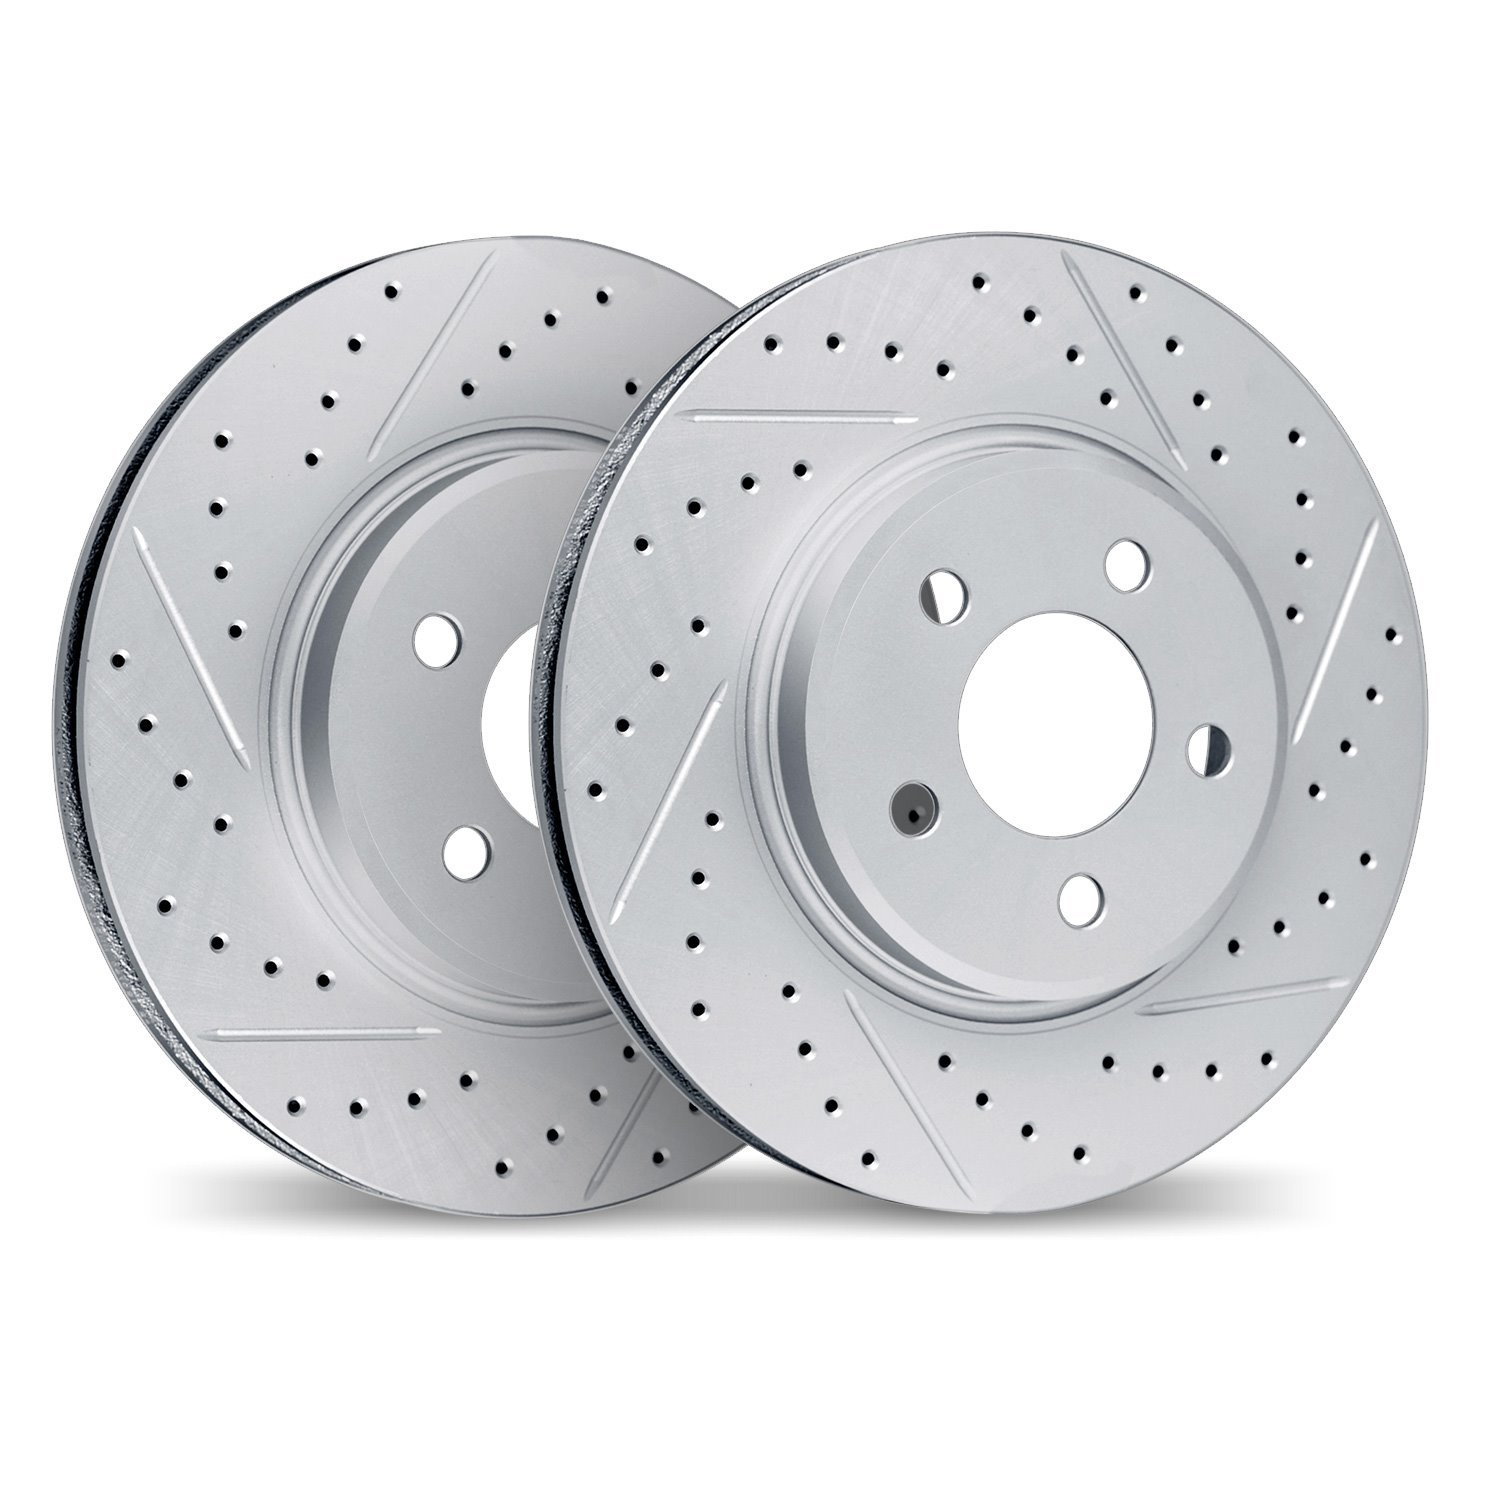 2002-47040 Geoperformance Drilled/Slotted Brake Rotors, 1988-1996 GM, Position: Rear